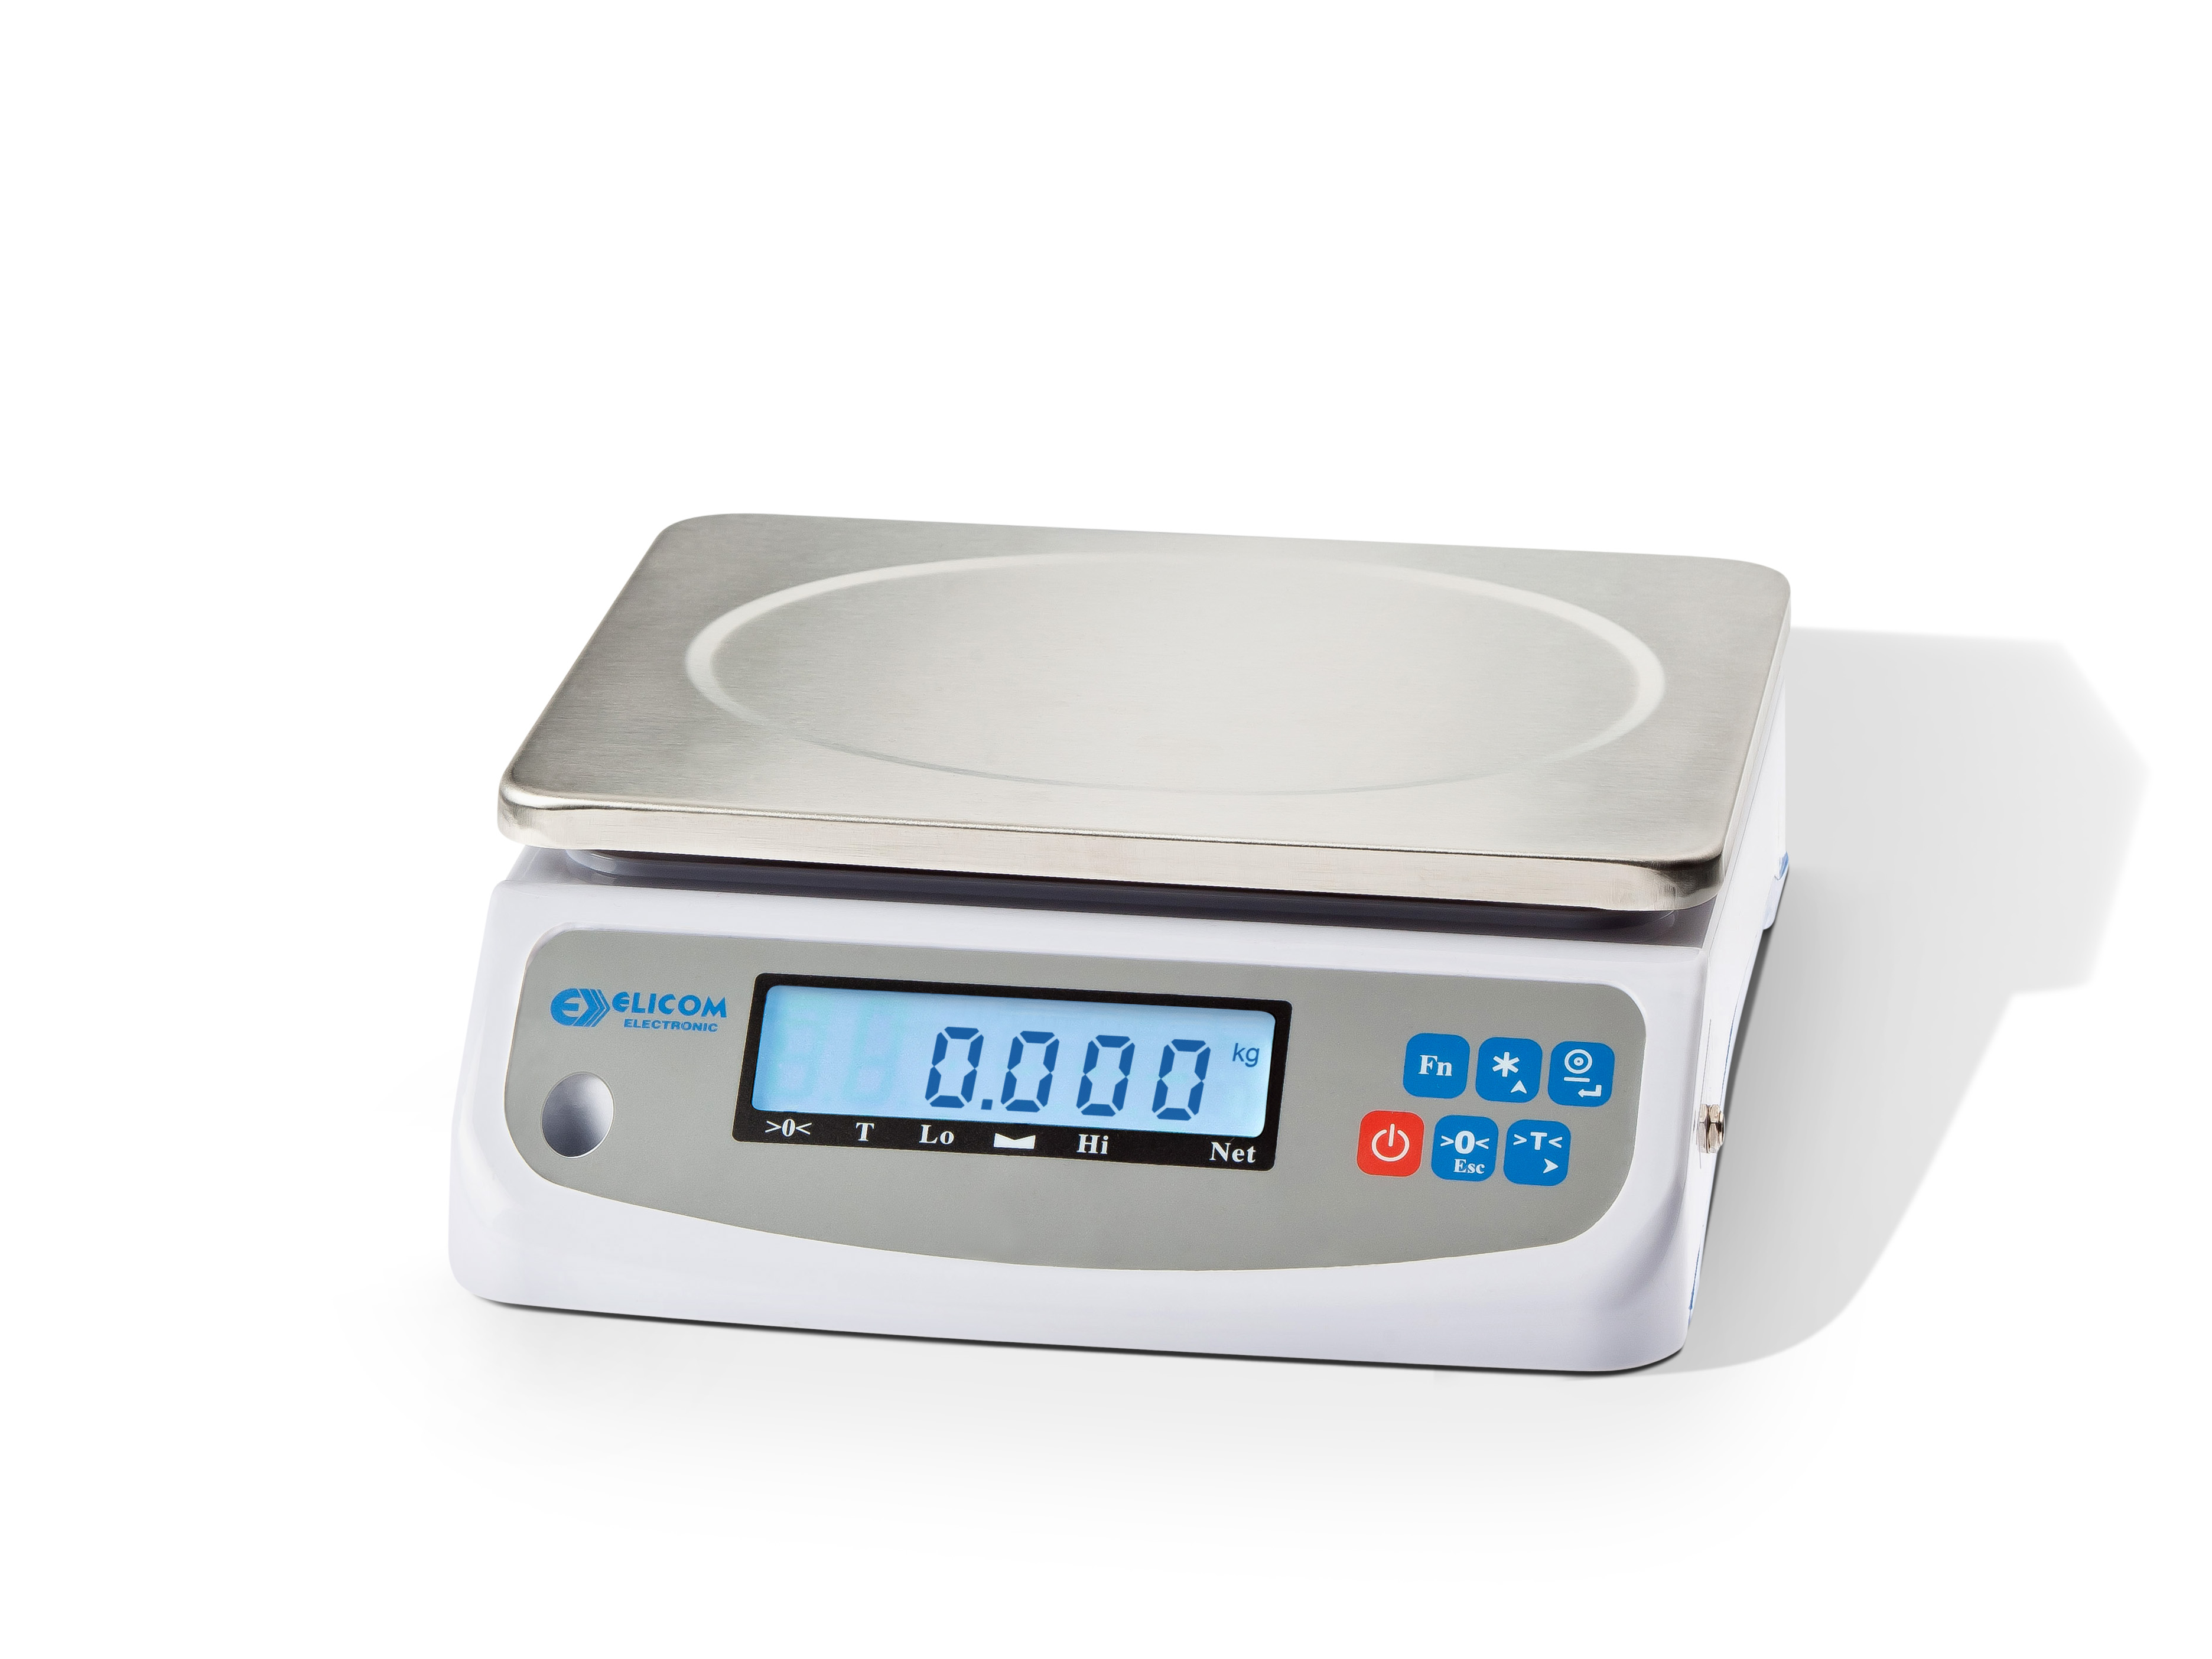 ELICOM PK Compact bench scale